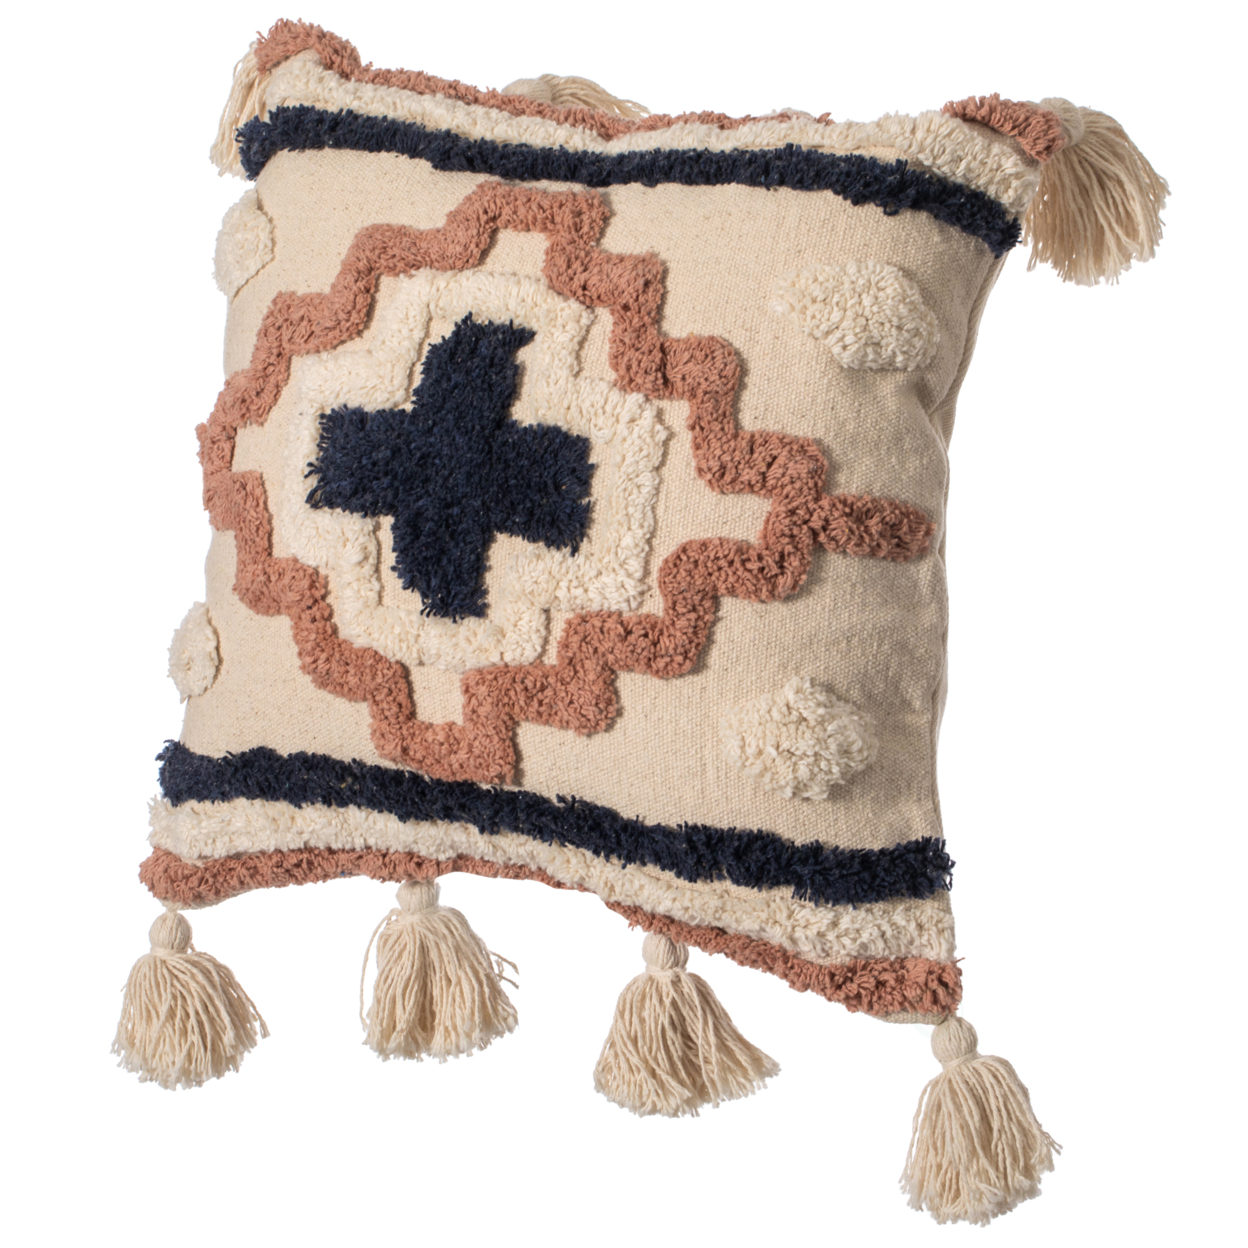 16 Handwoven Cotton Throw Pillow Cover With Tufted Designs And Side Tassels - Dots With Cushion